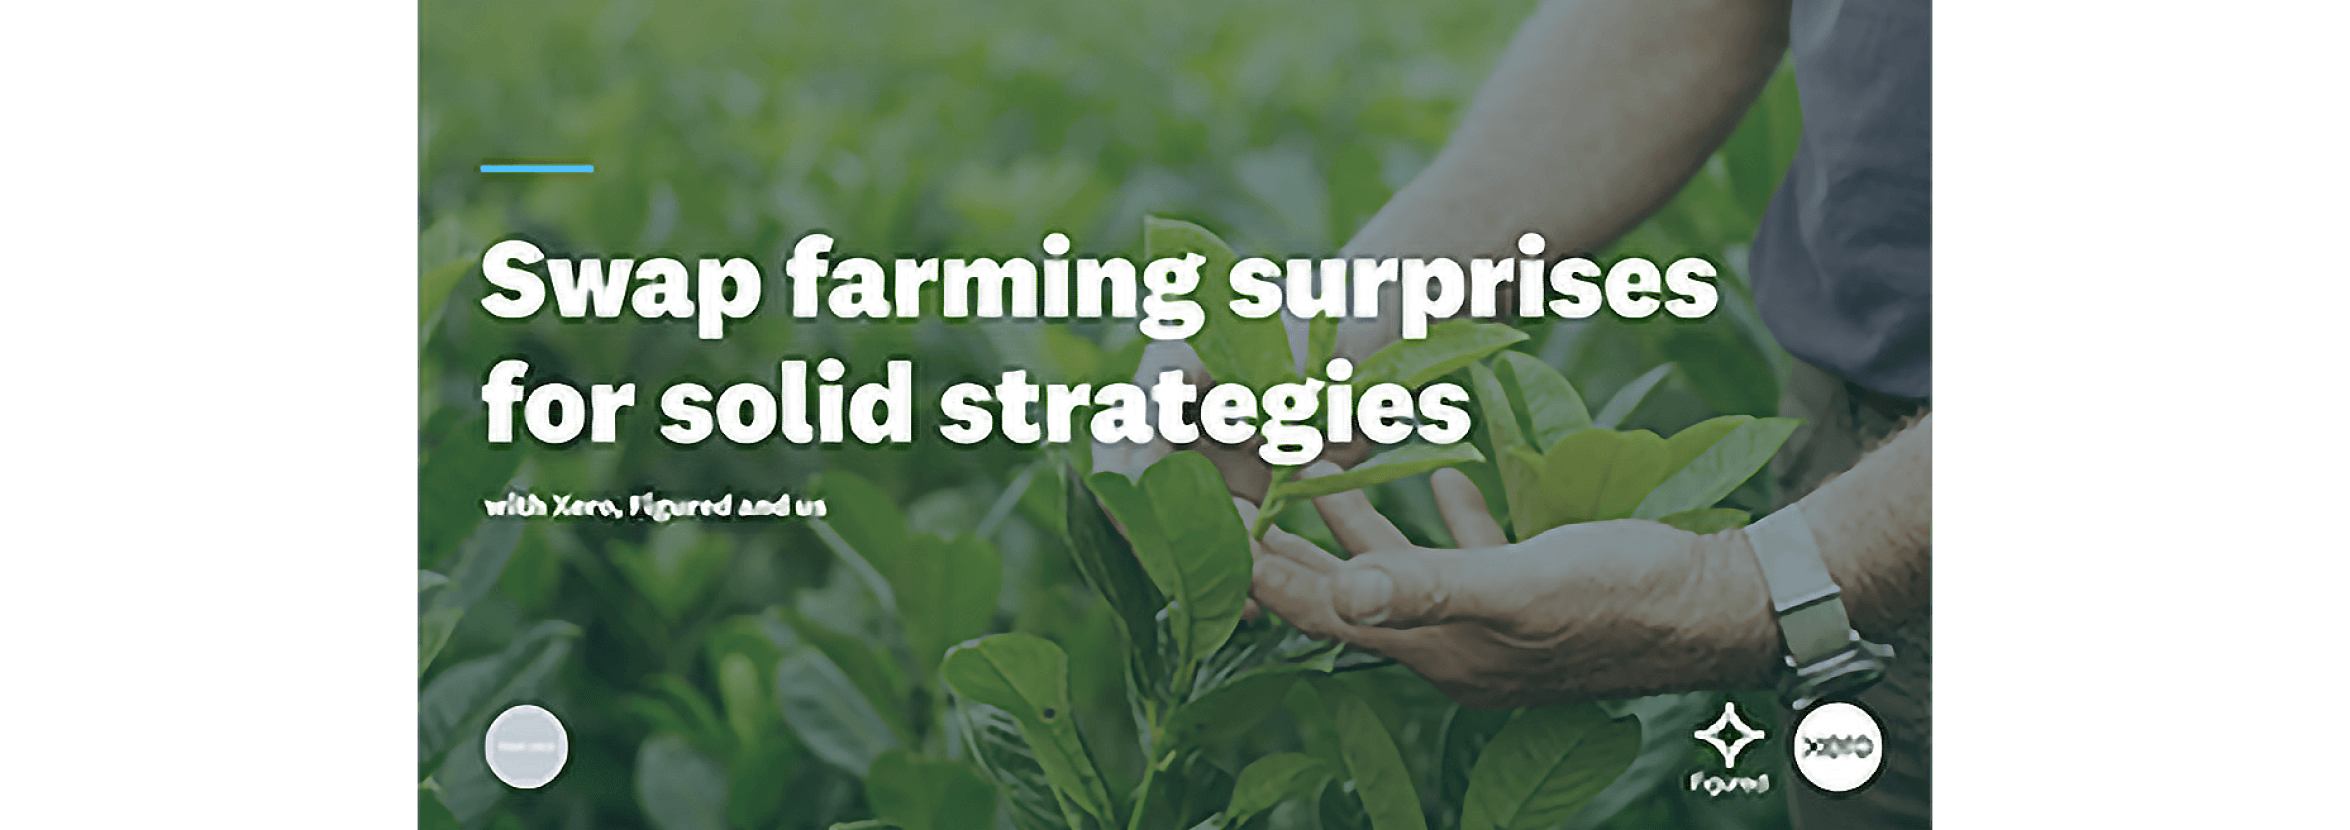 Swap farming surprises for solid strategies, slide showing a farmer checking bean crops.